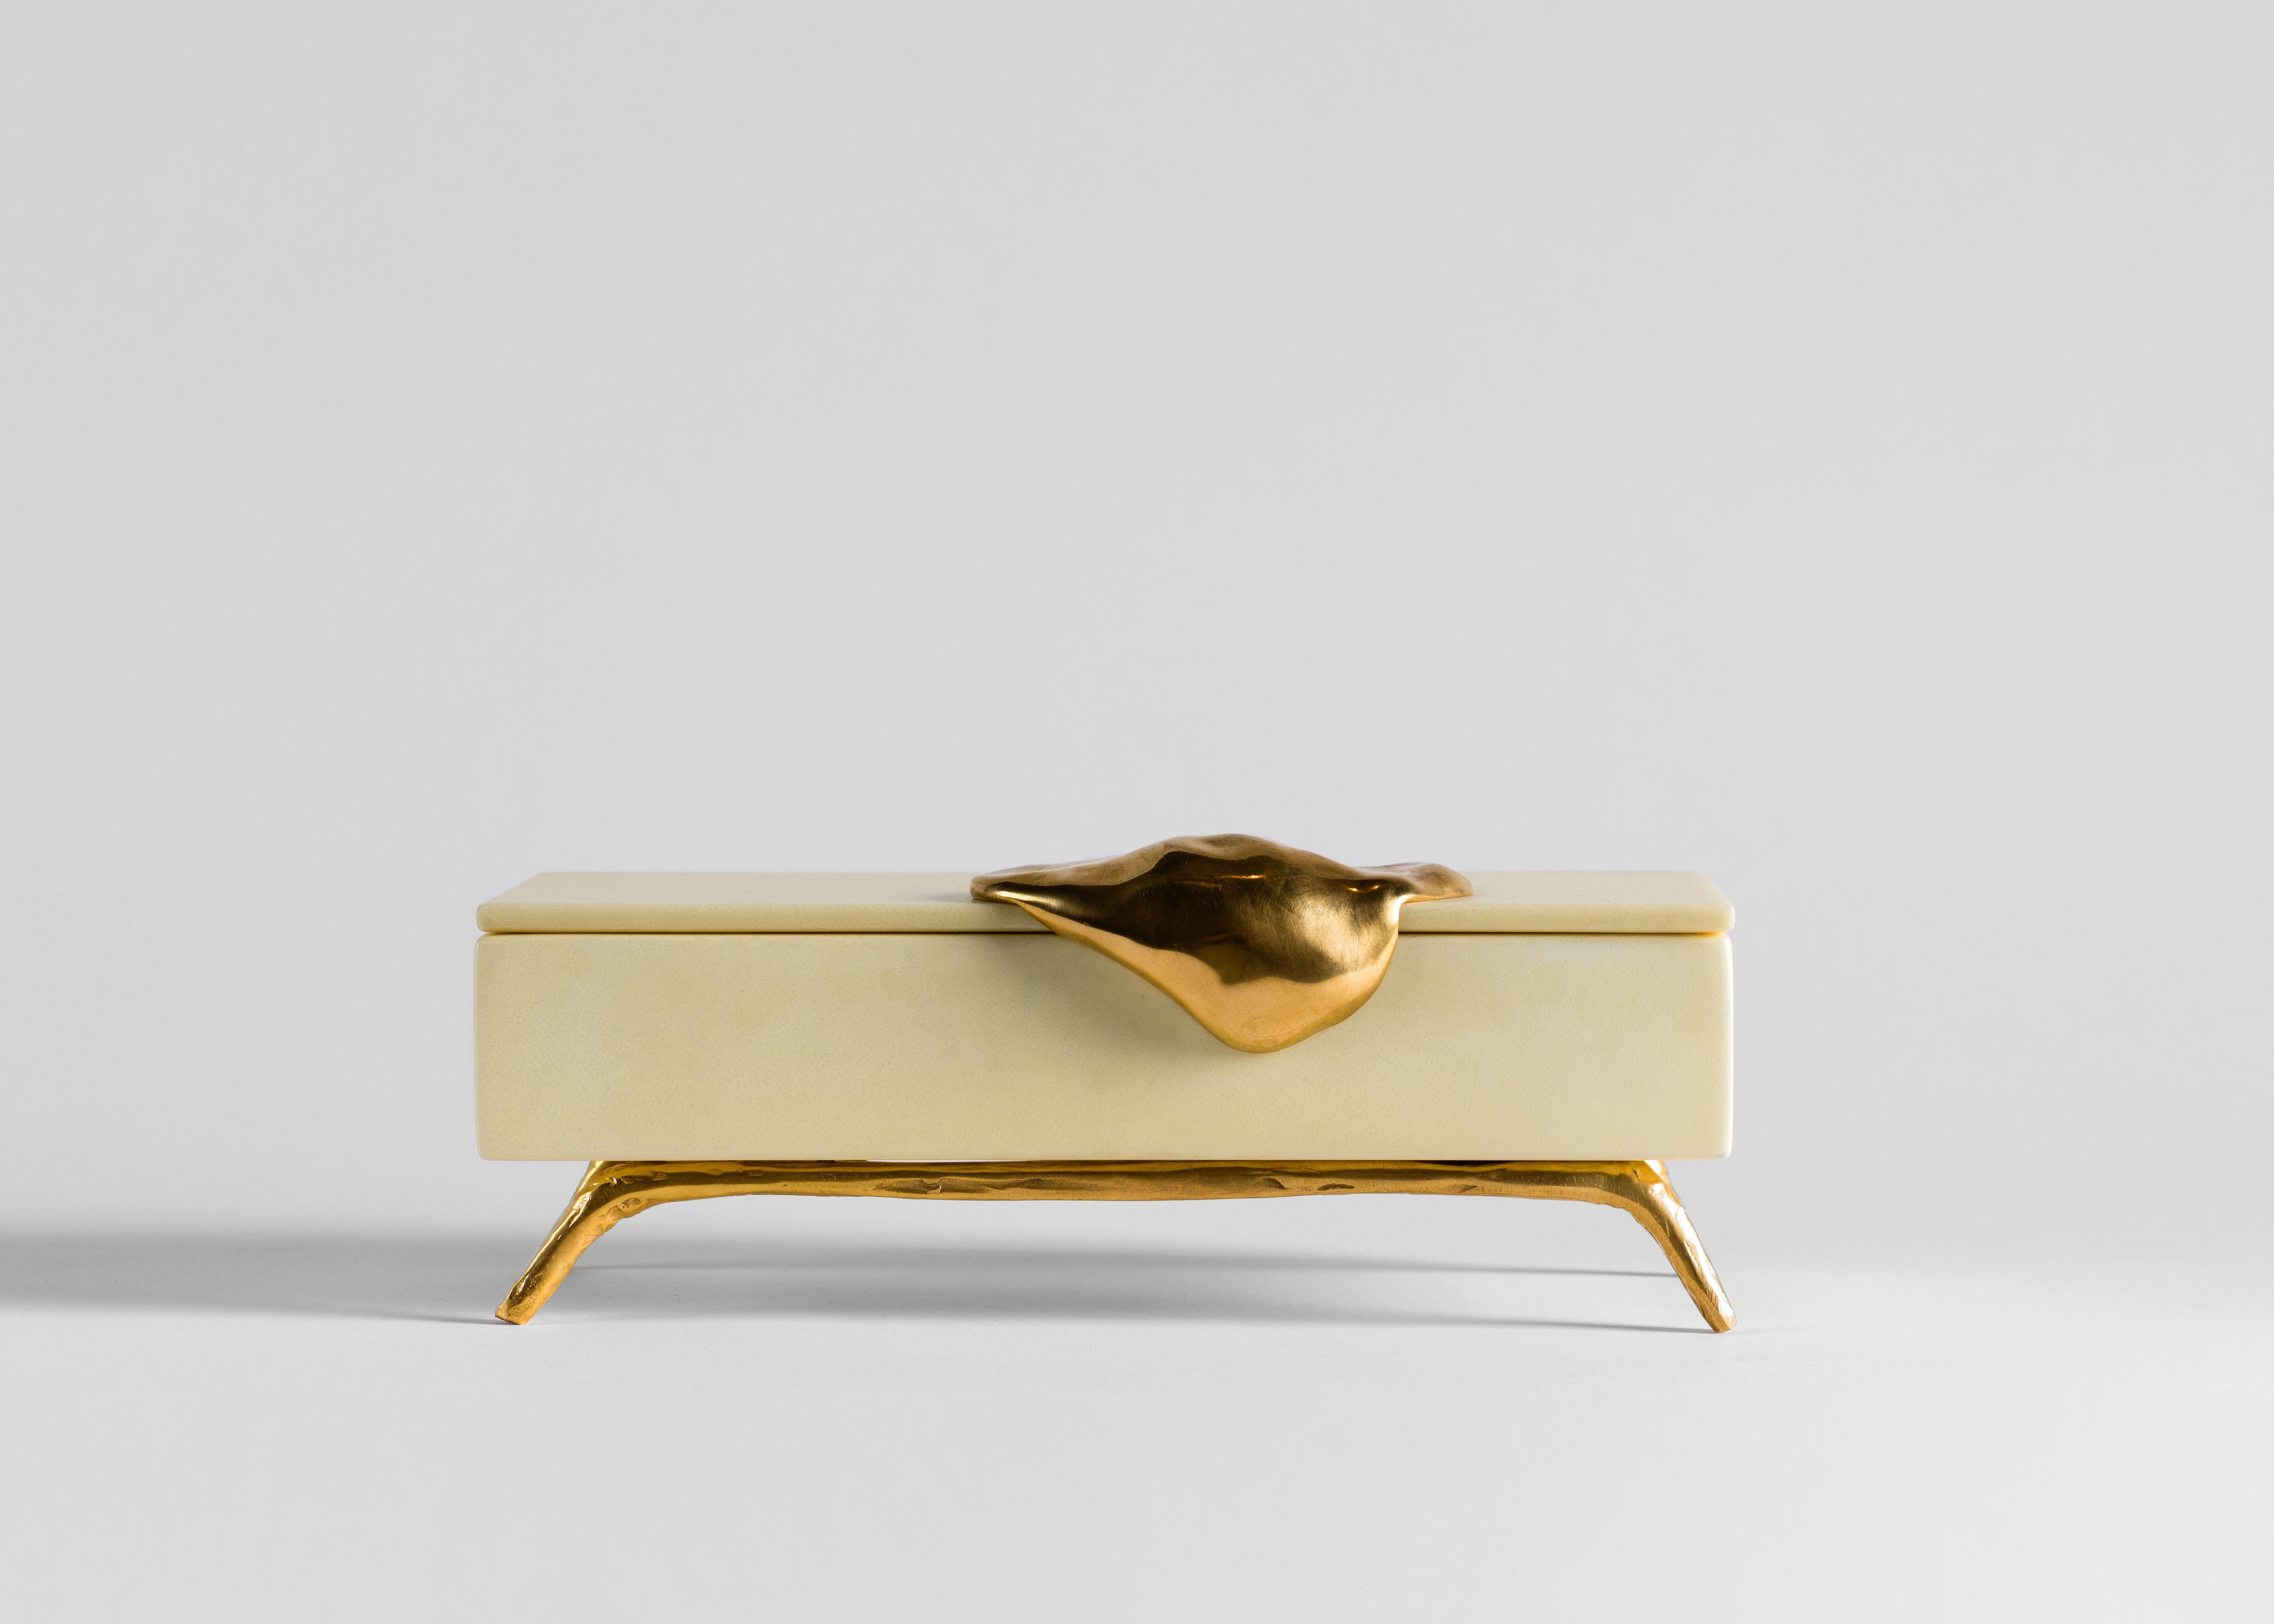 A collaboration between Achille Salvagni and Fabio Gnessi, Aldus aims to Revive the aesthetic ideals of Greek and Latin philosophy. Functional and aesthetic objects alike fuse organic forms and Latinate imagery with a distinctly contemporary mastery